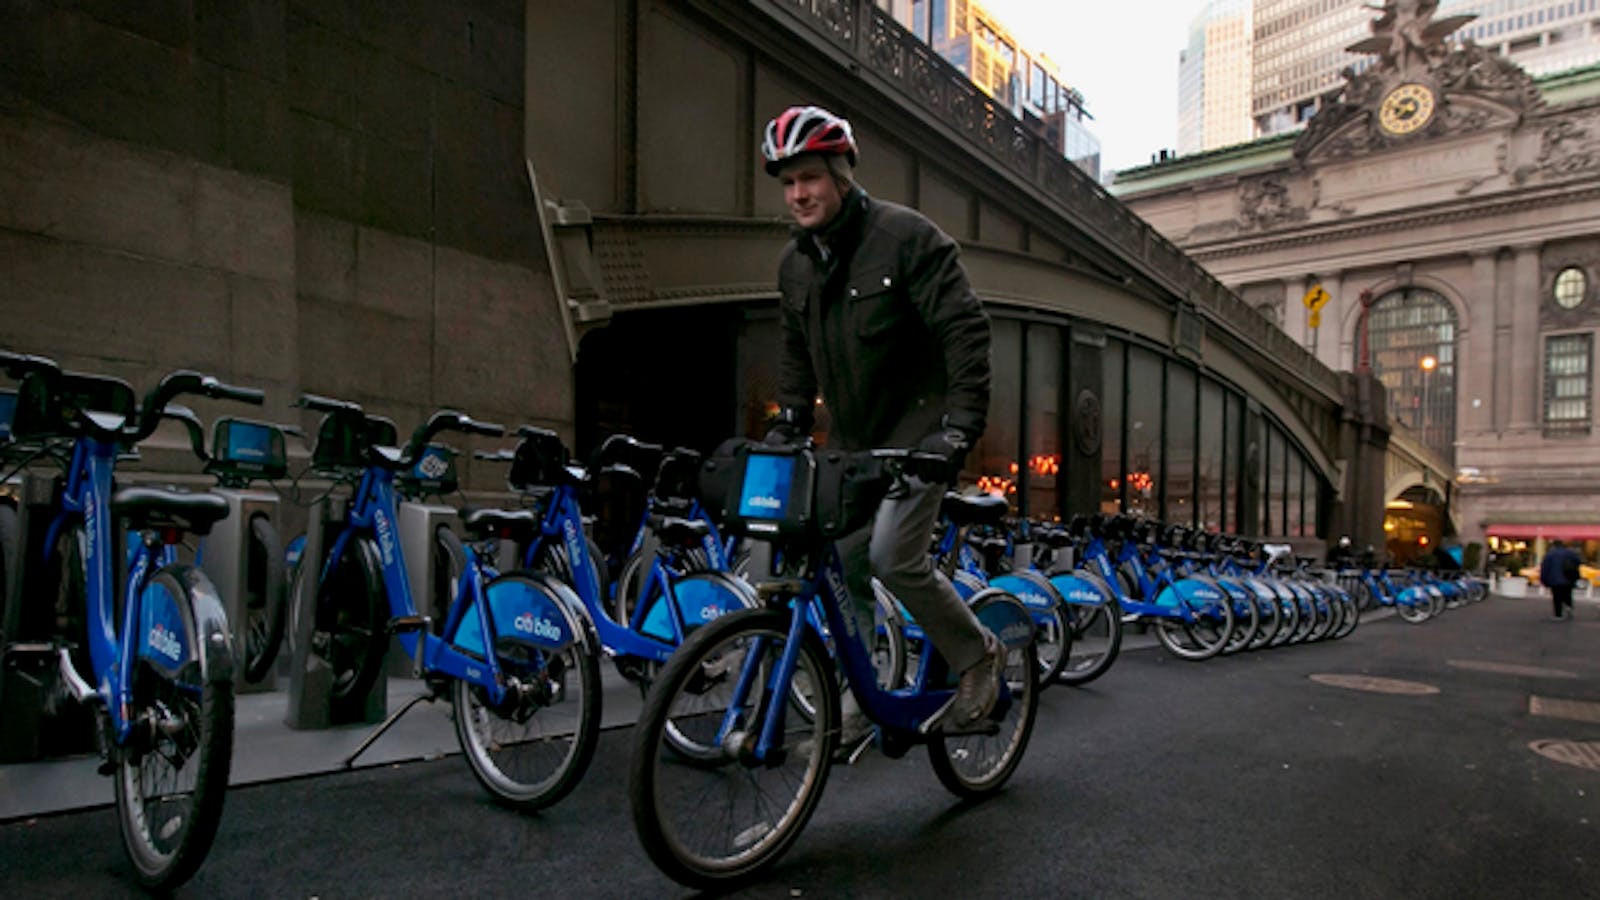 A man rode a Citi Bike, which is now owned by Lyft, near New York City's Grand Central Terminal in early 2015. Photo: AP